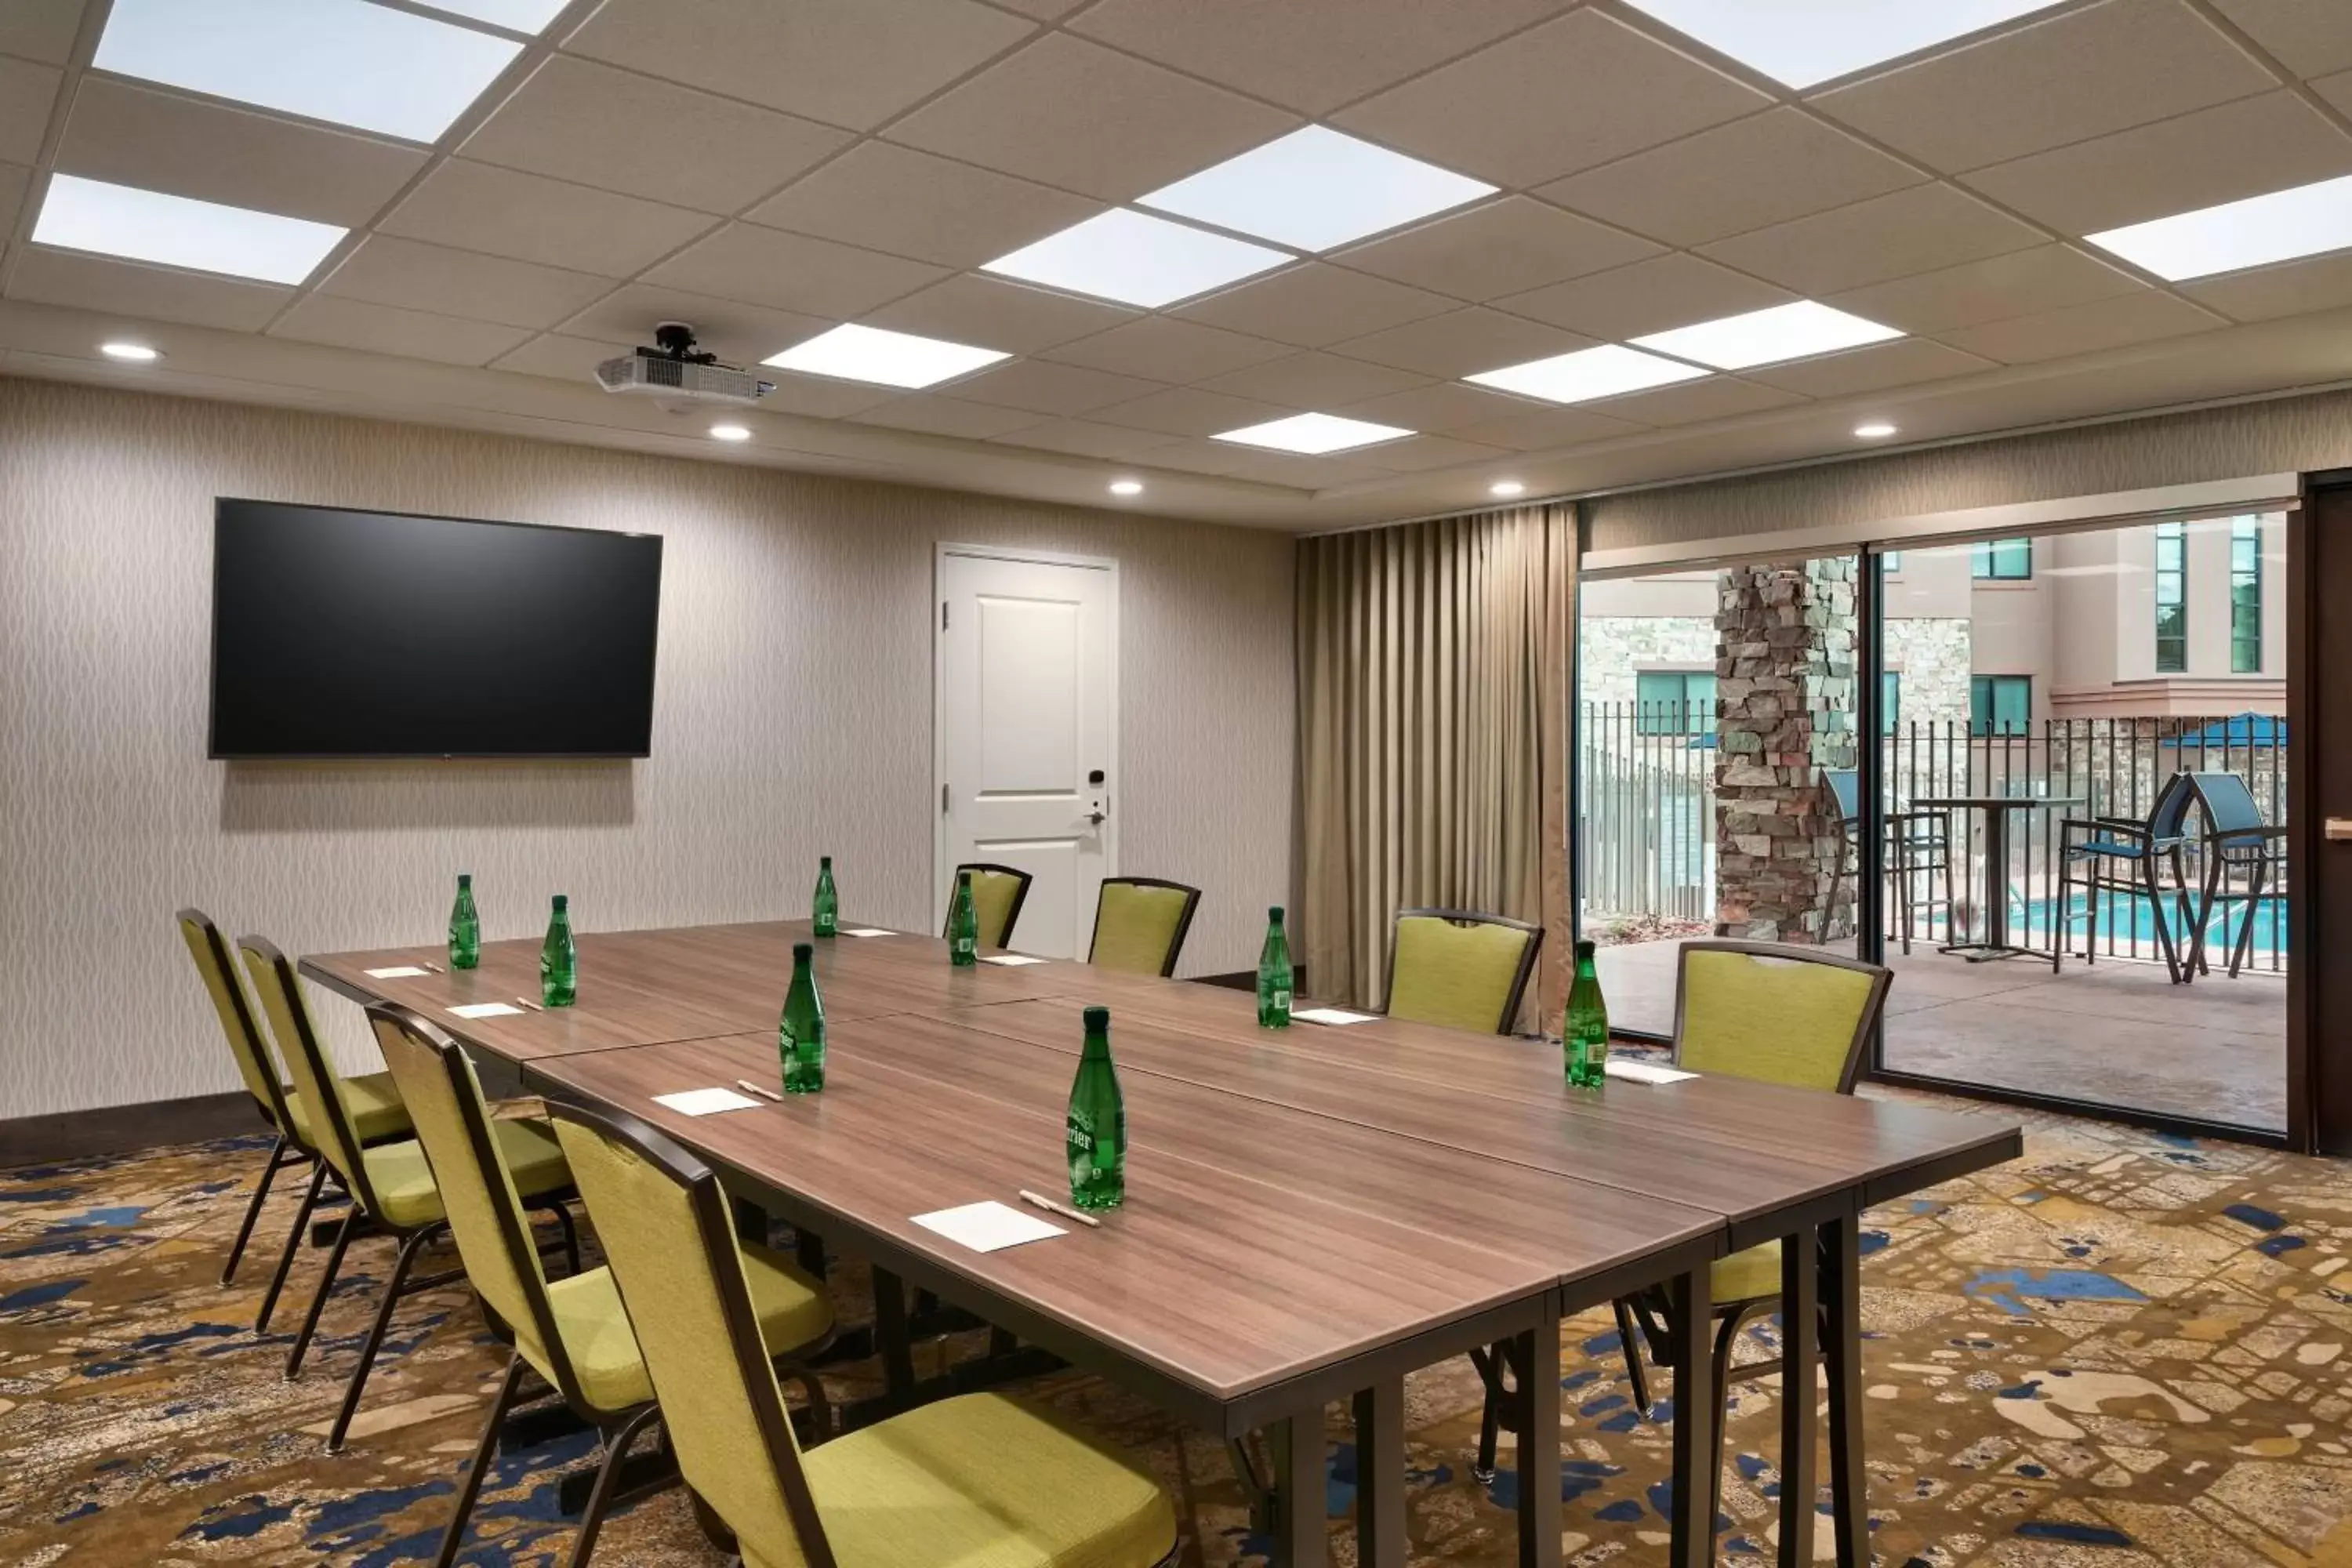 Meeting/conference room in Residence Inn by Marriott Sedona